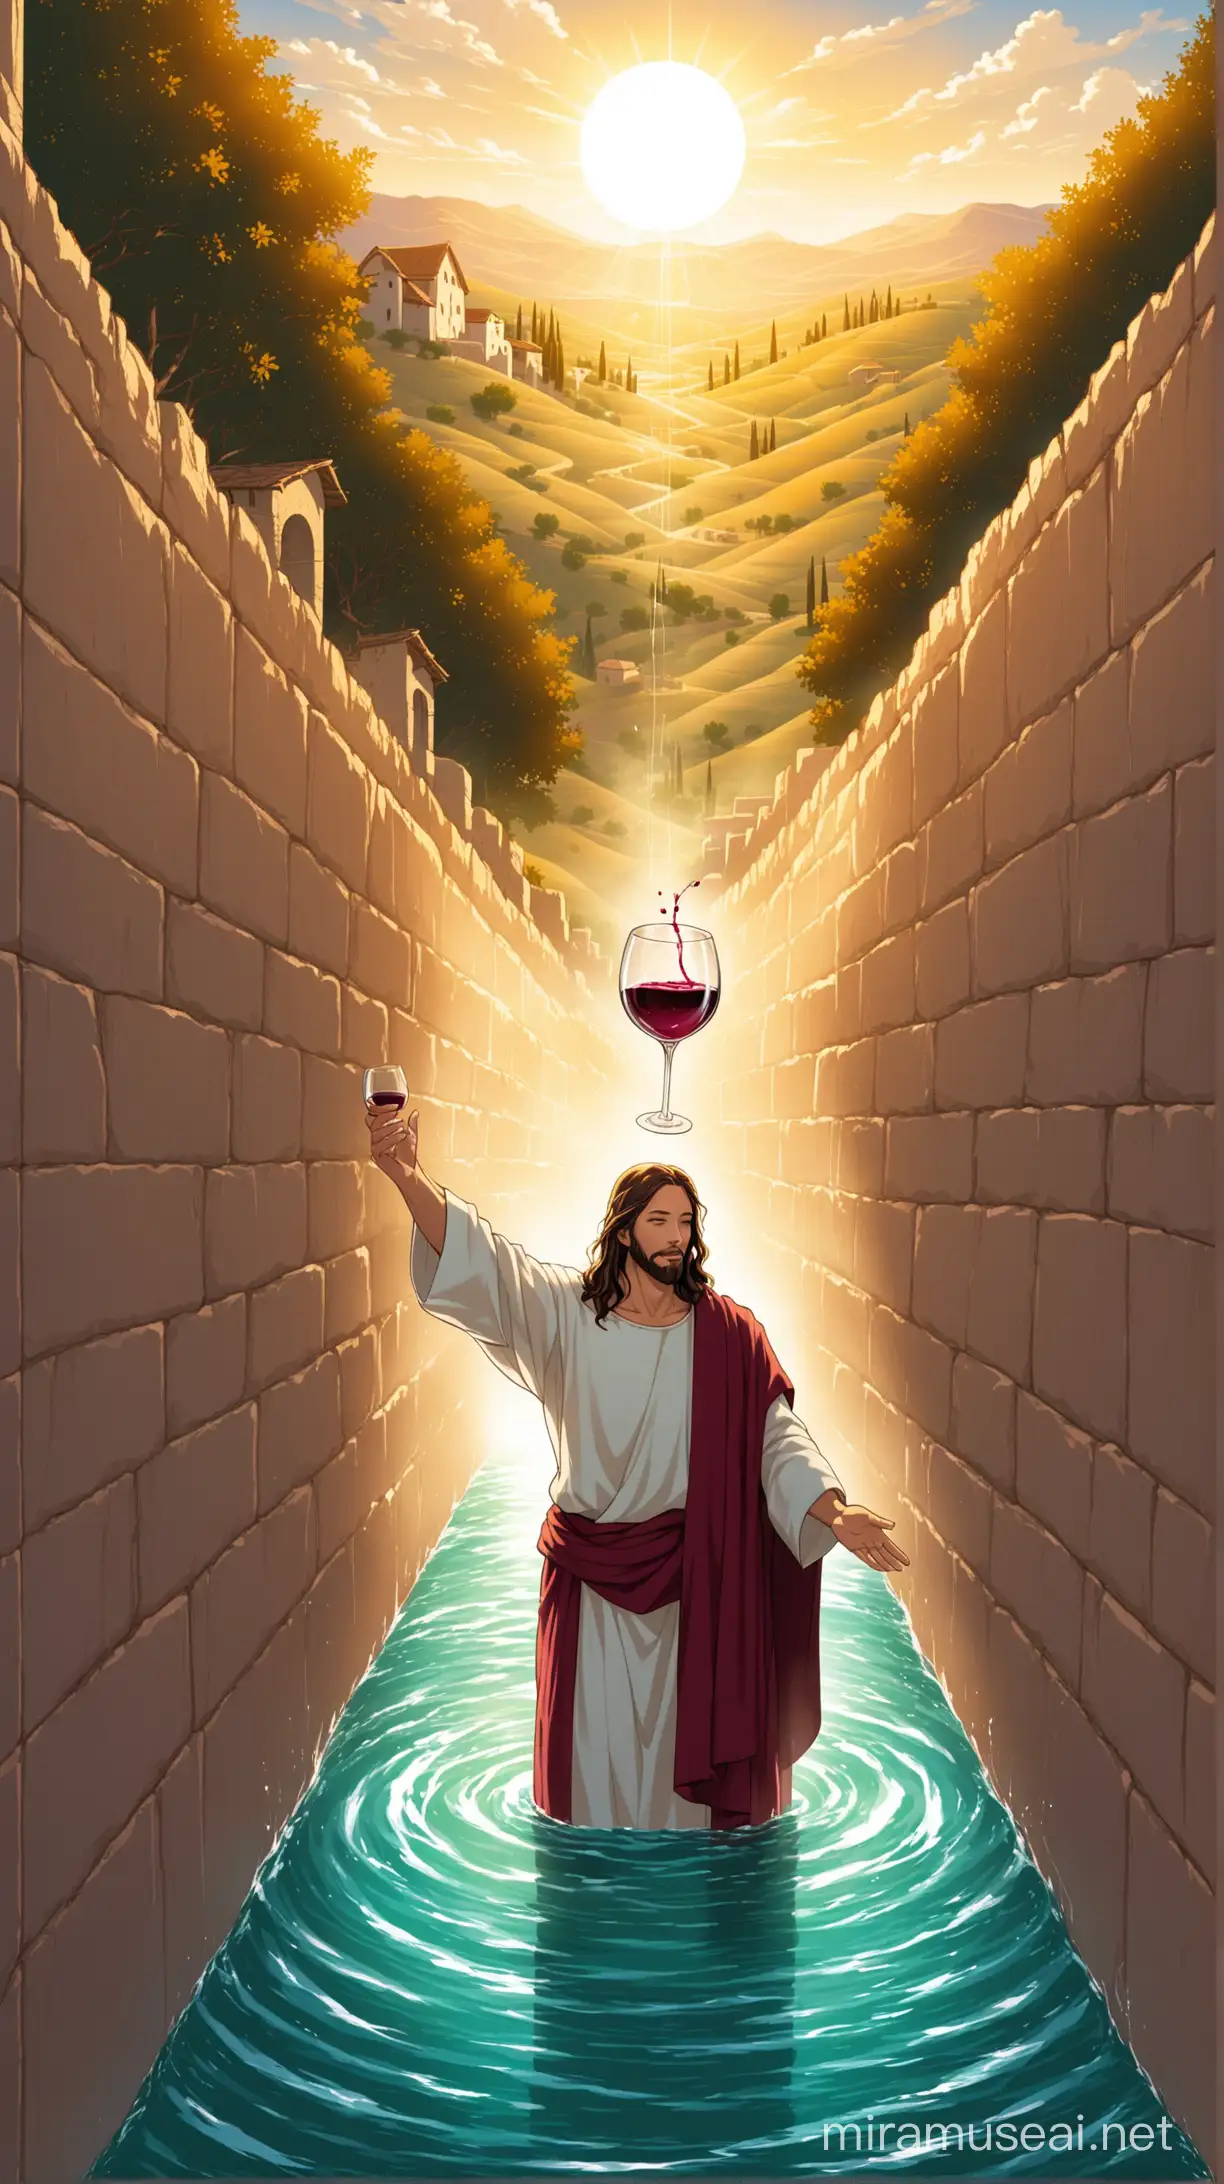 Miracle of Jesus Water into Wine Transformation